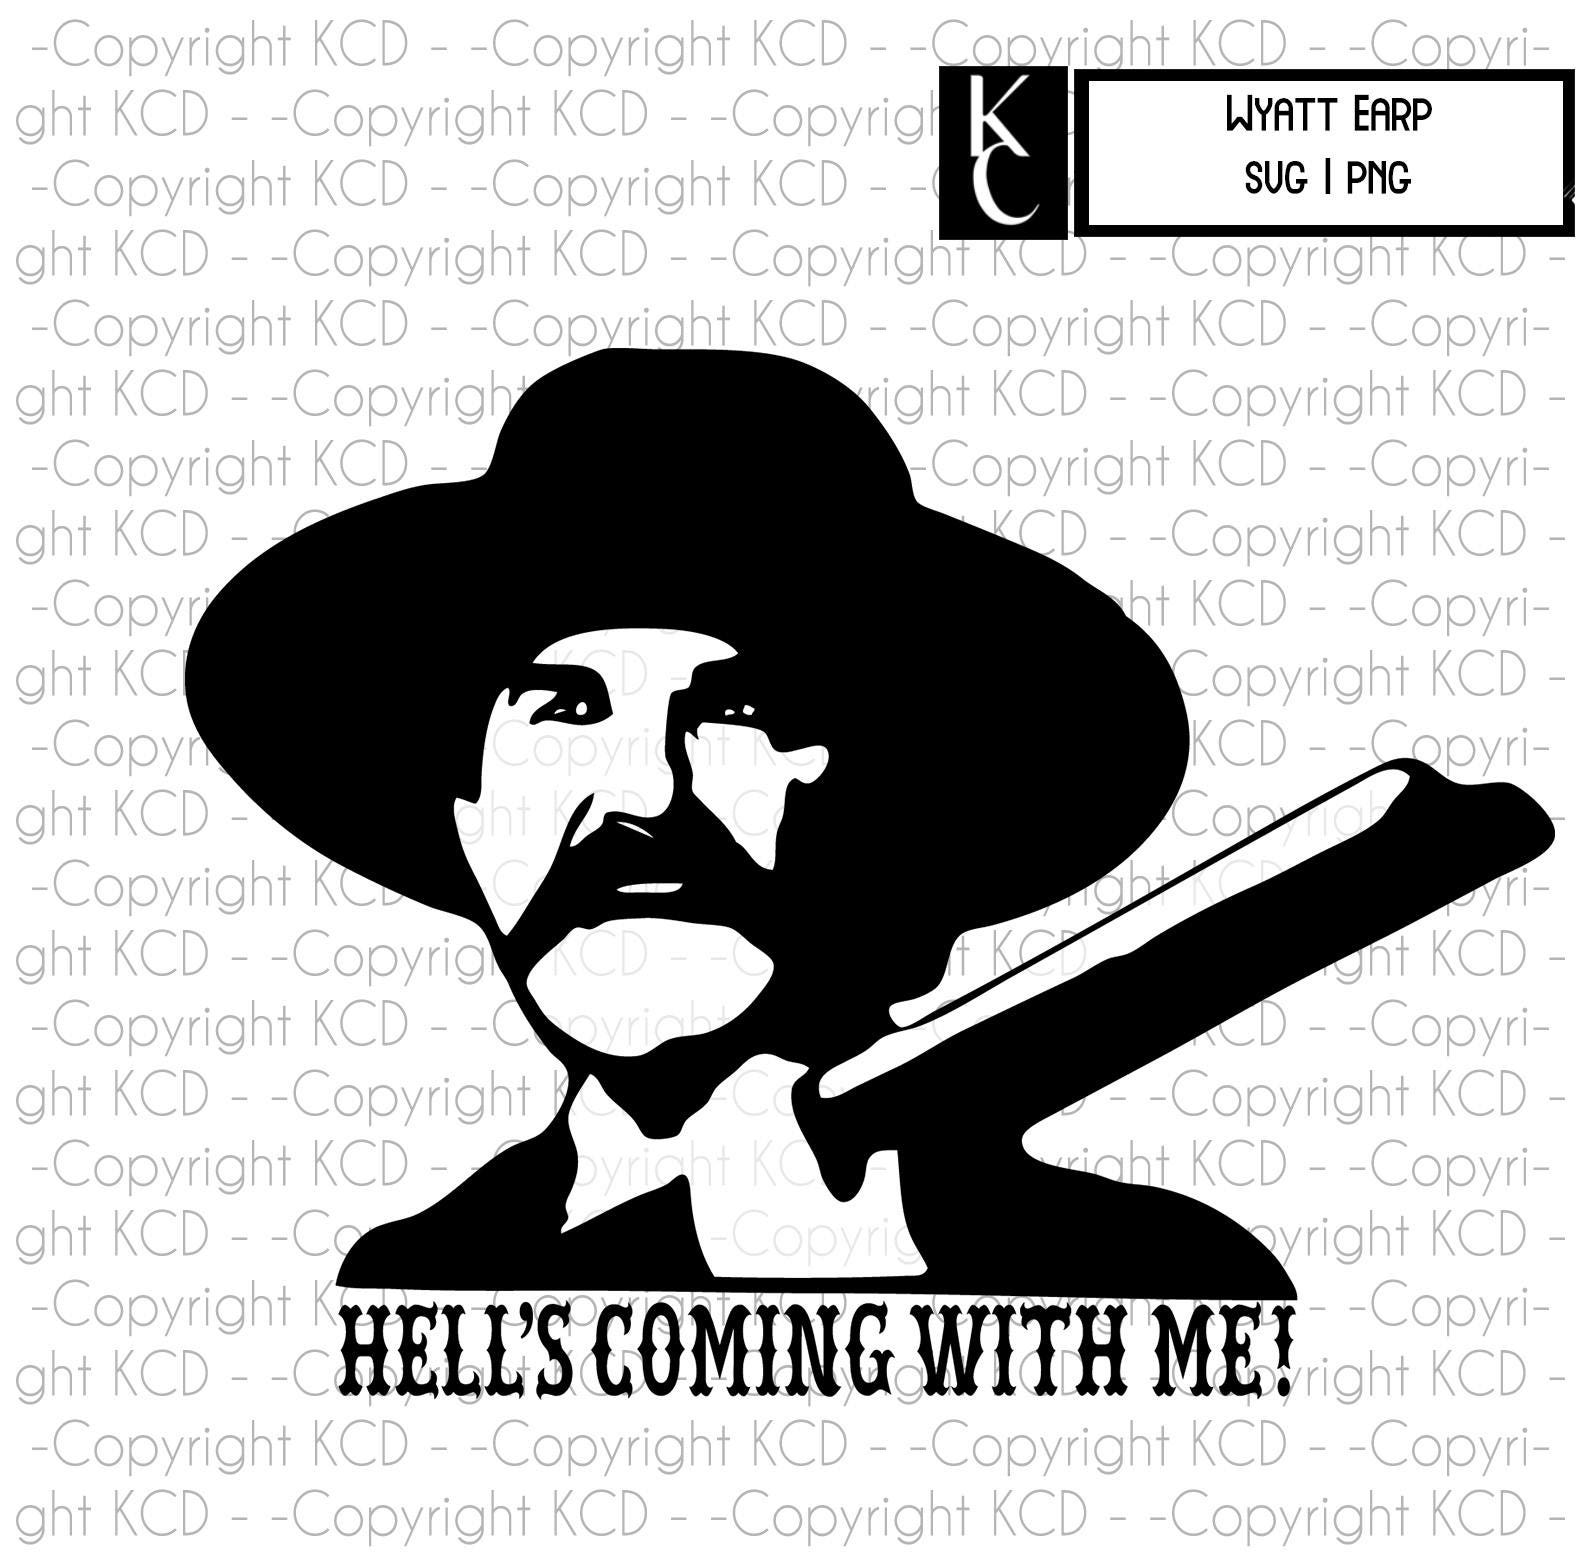 Theres a Chance Your Doc Holliday Tattoo Might Be Someone Else